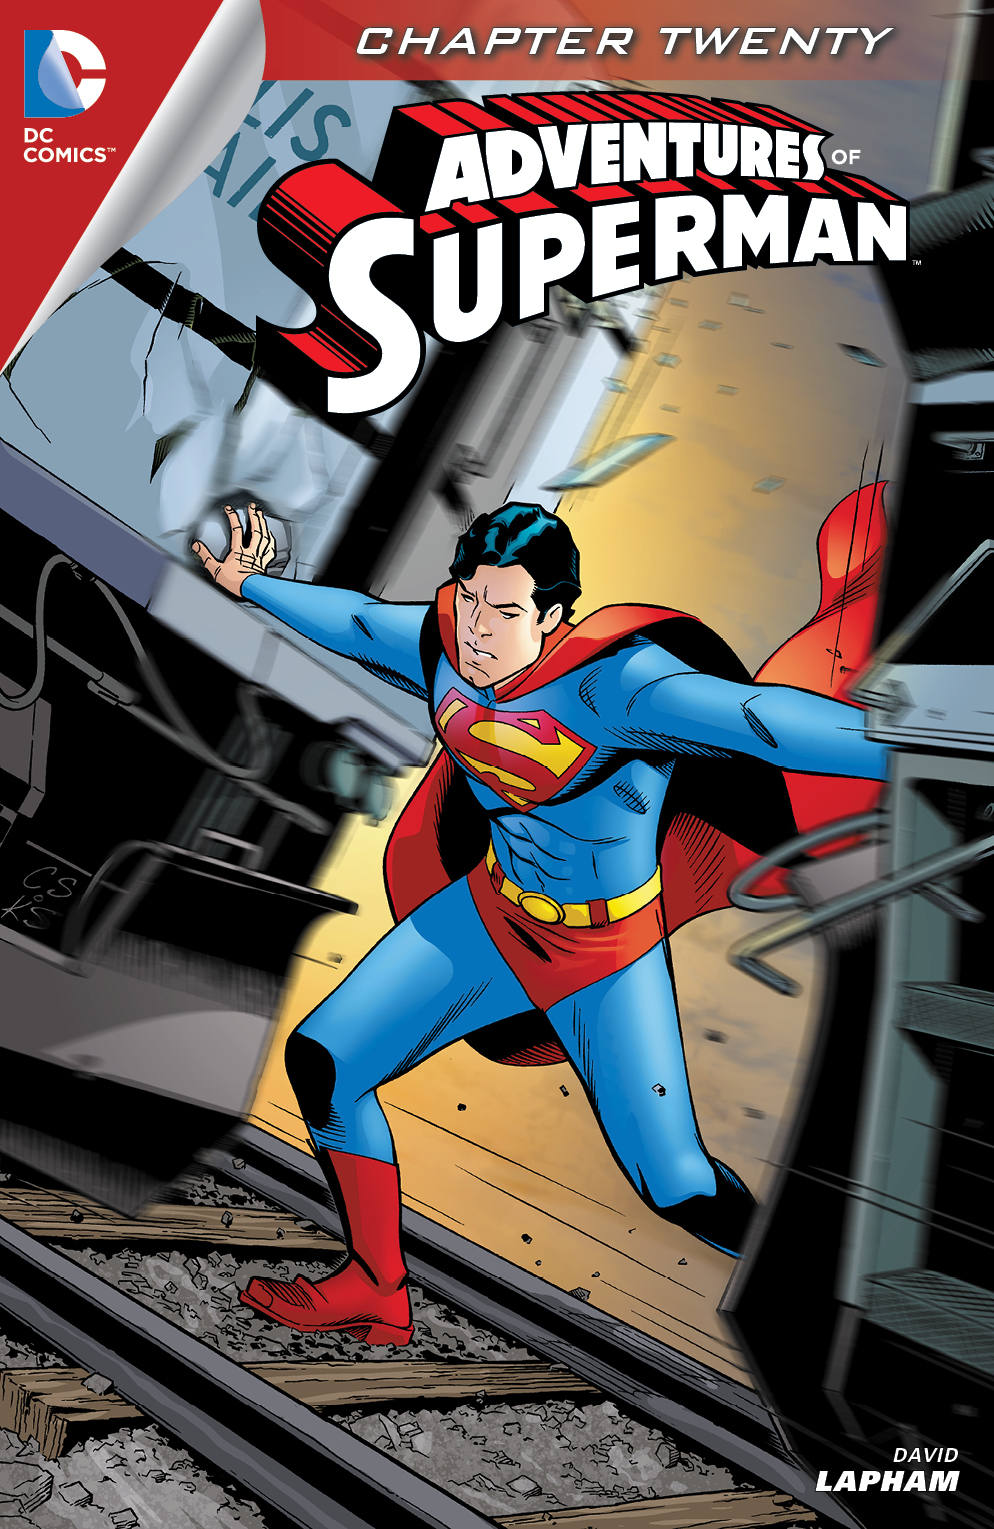 Adventures of Superman (2013-) #20 preview images